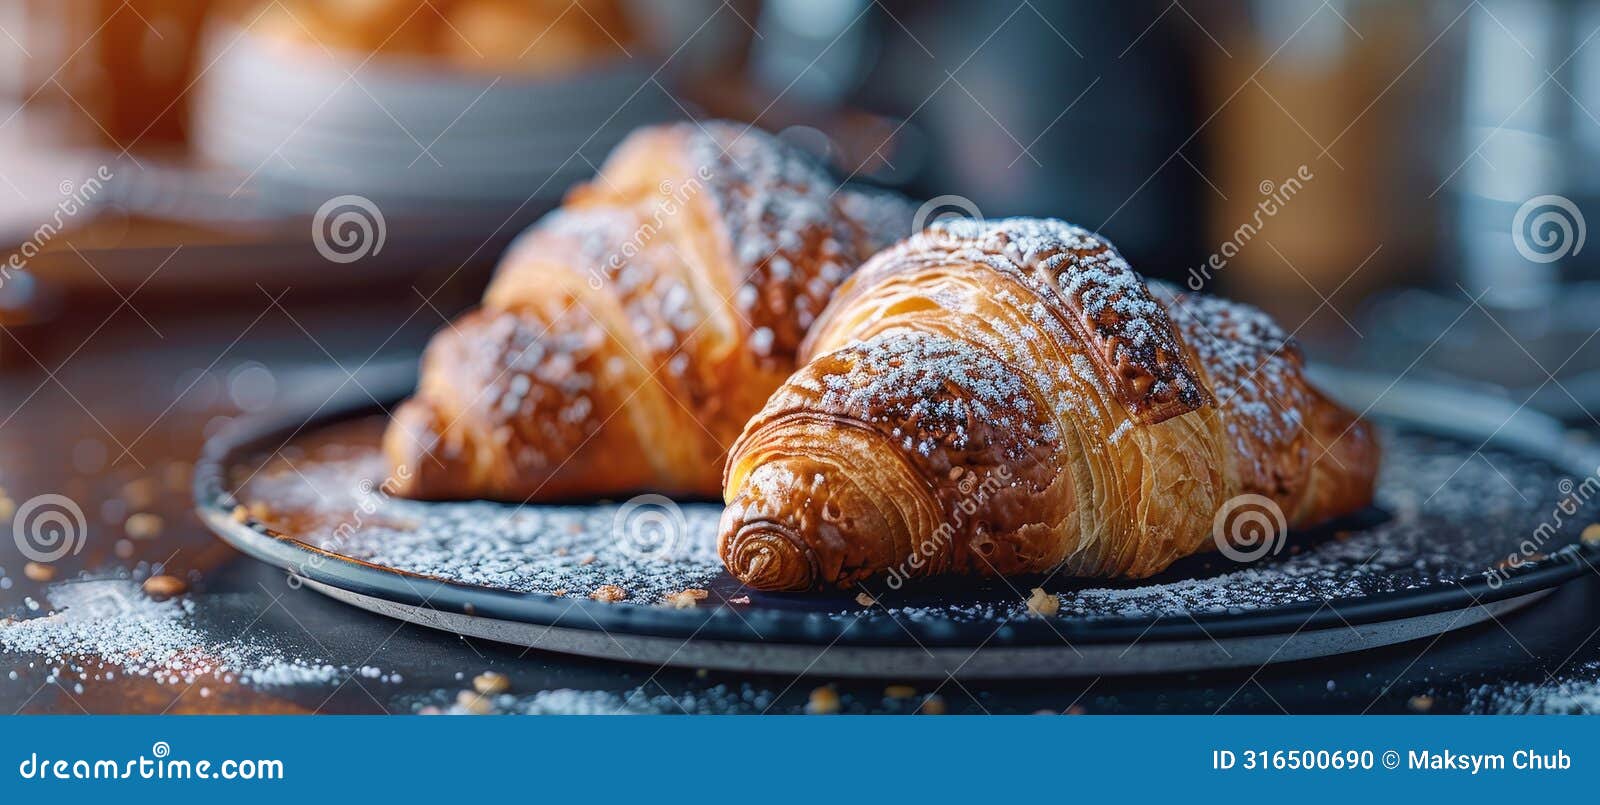 macro image of a croissant with flaky layers and buttery texture in hyperrealistic detail